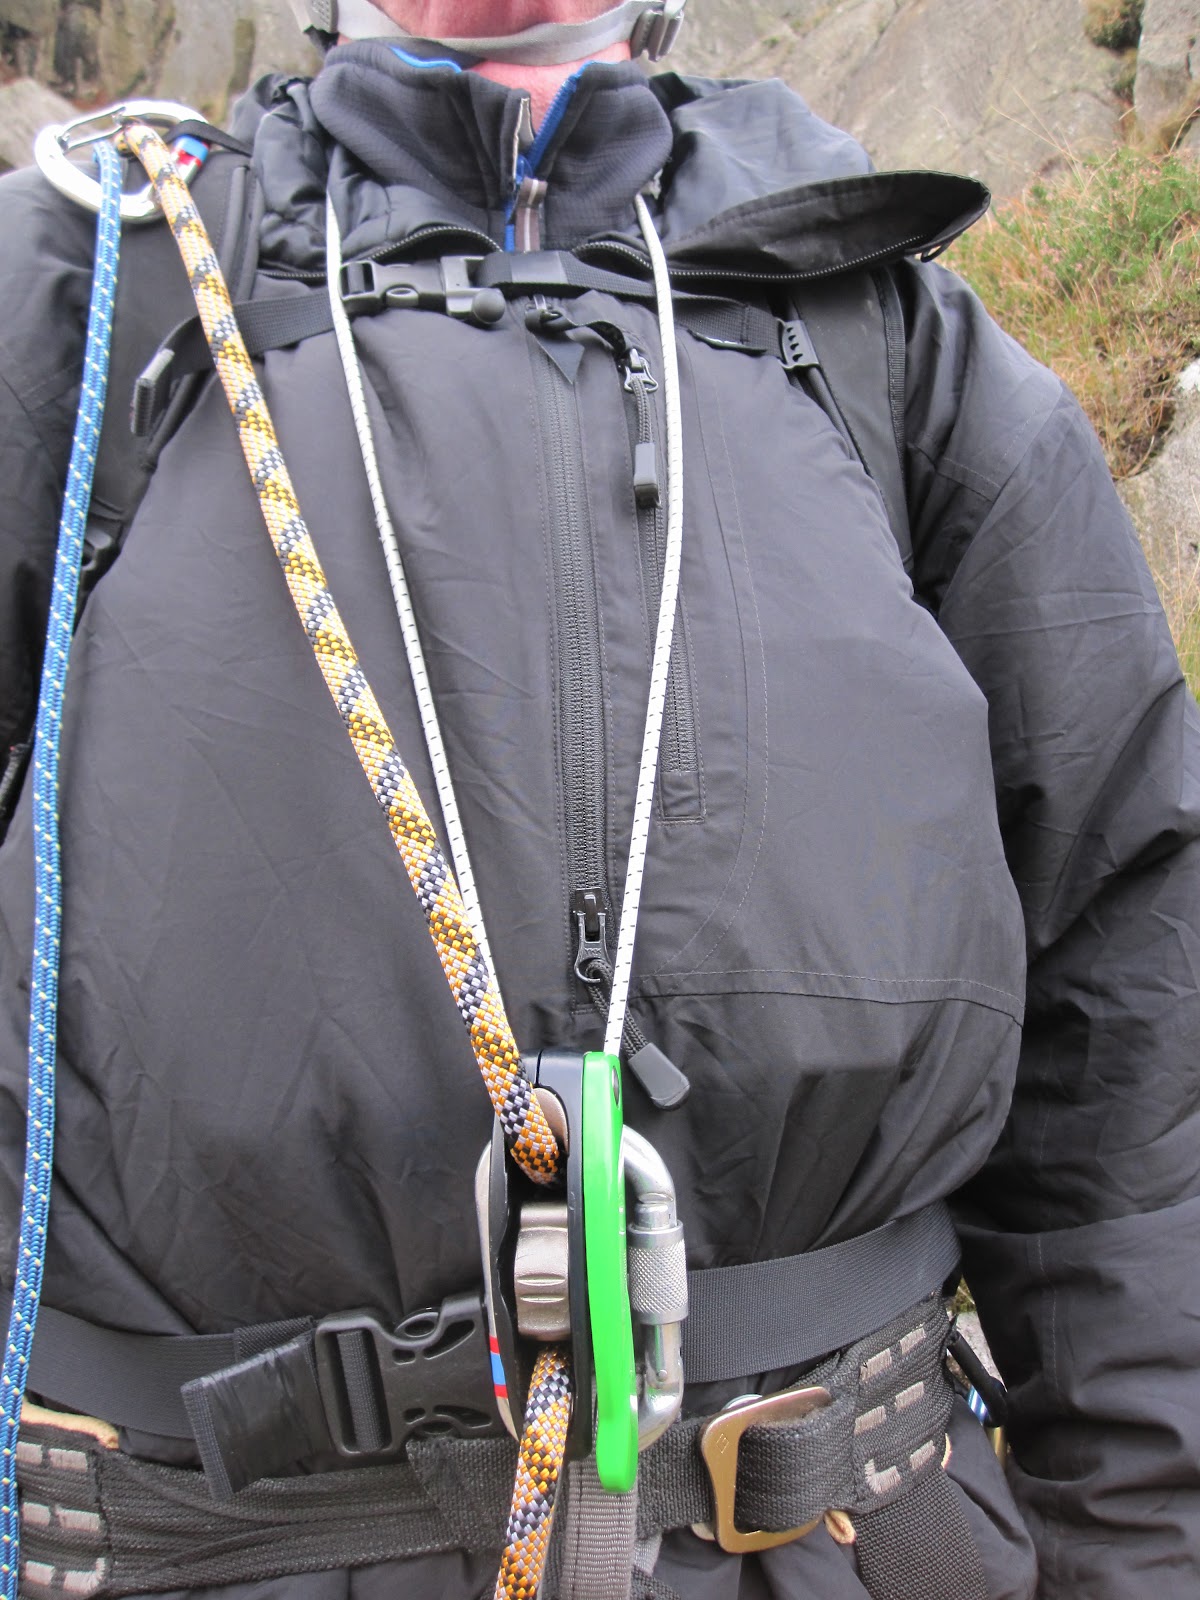 Rob Thornton's Solo Mountaineering Blog.: SOLO SELF BELAY WITH REVERSO ...